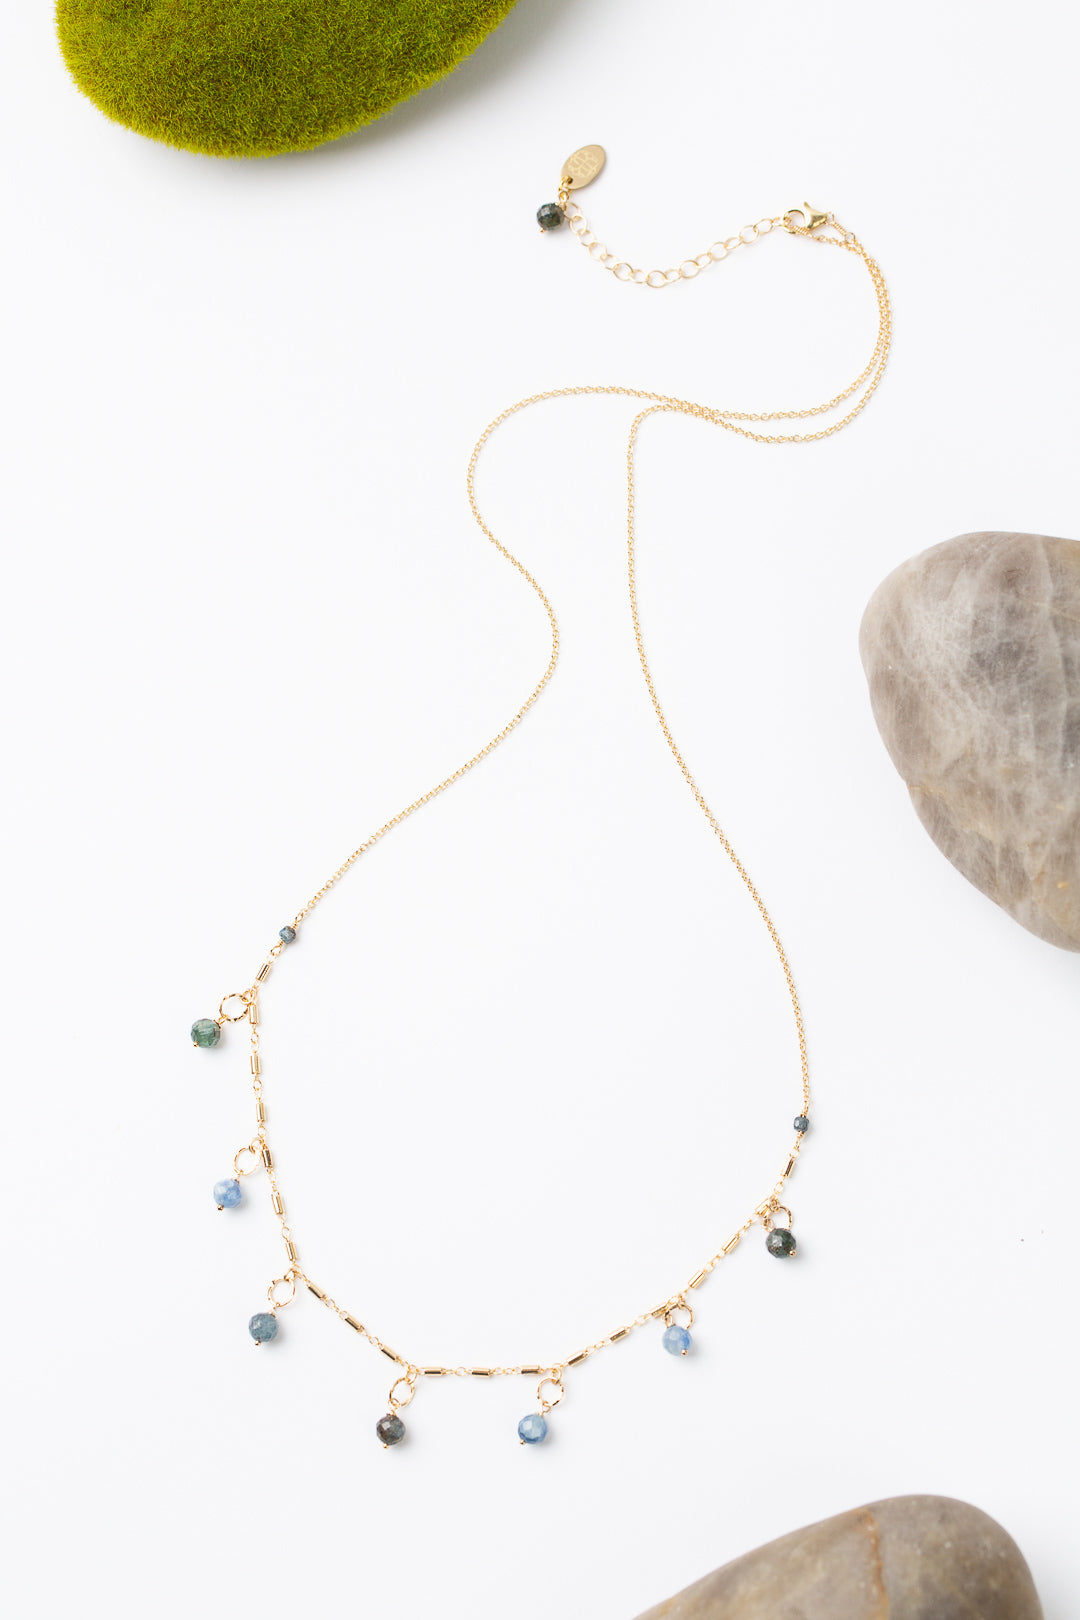 Ripple 24-26" with Kyanite, Gold Simple Necklace